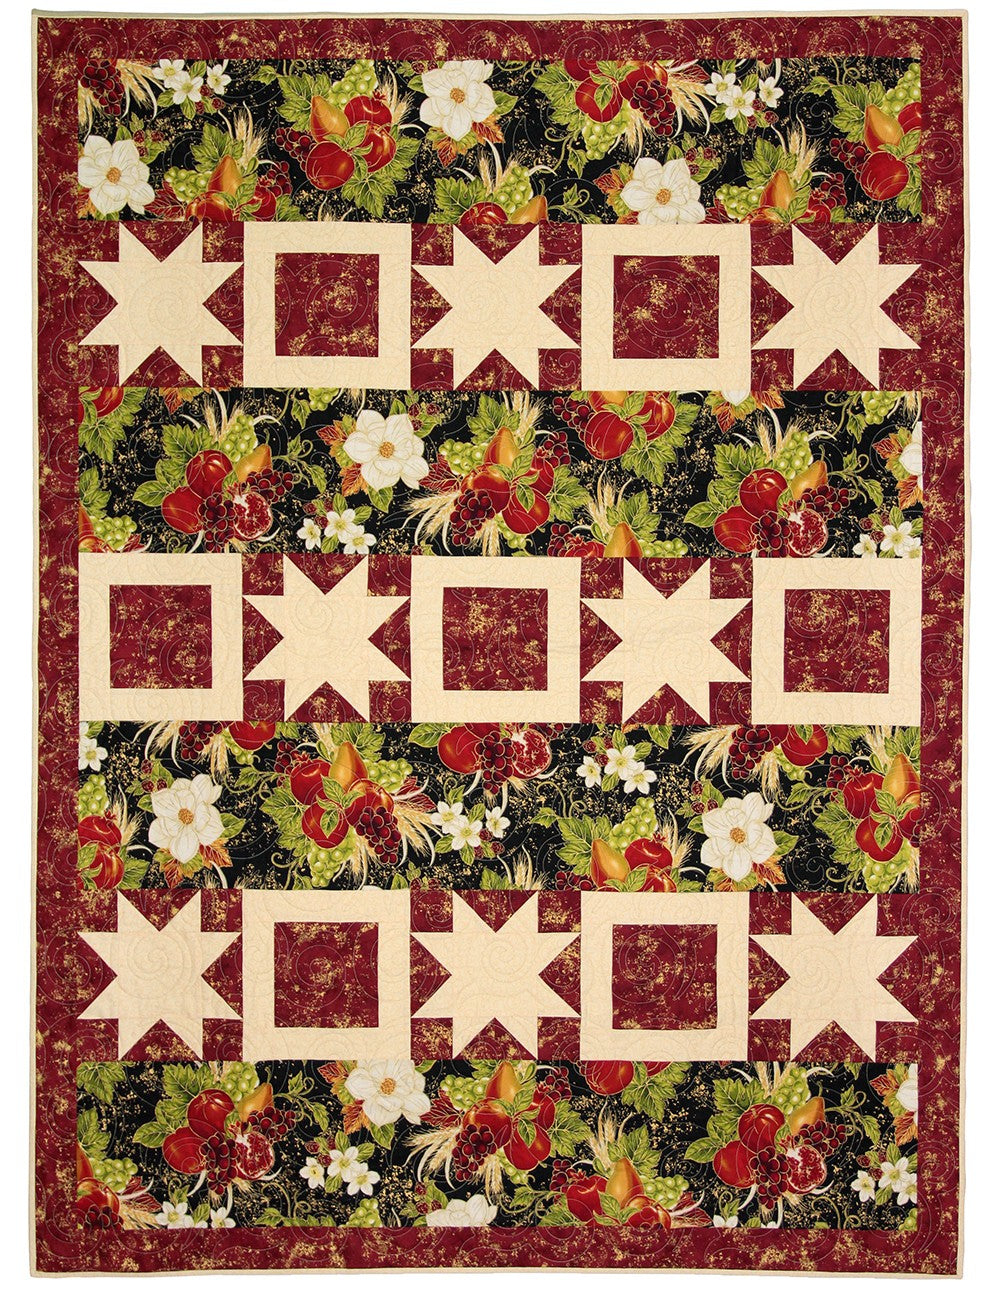 Make It Christmas with 3 Yard Quilts Book - 897086000600